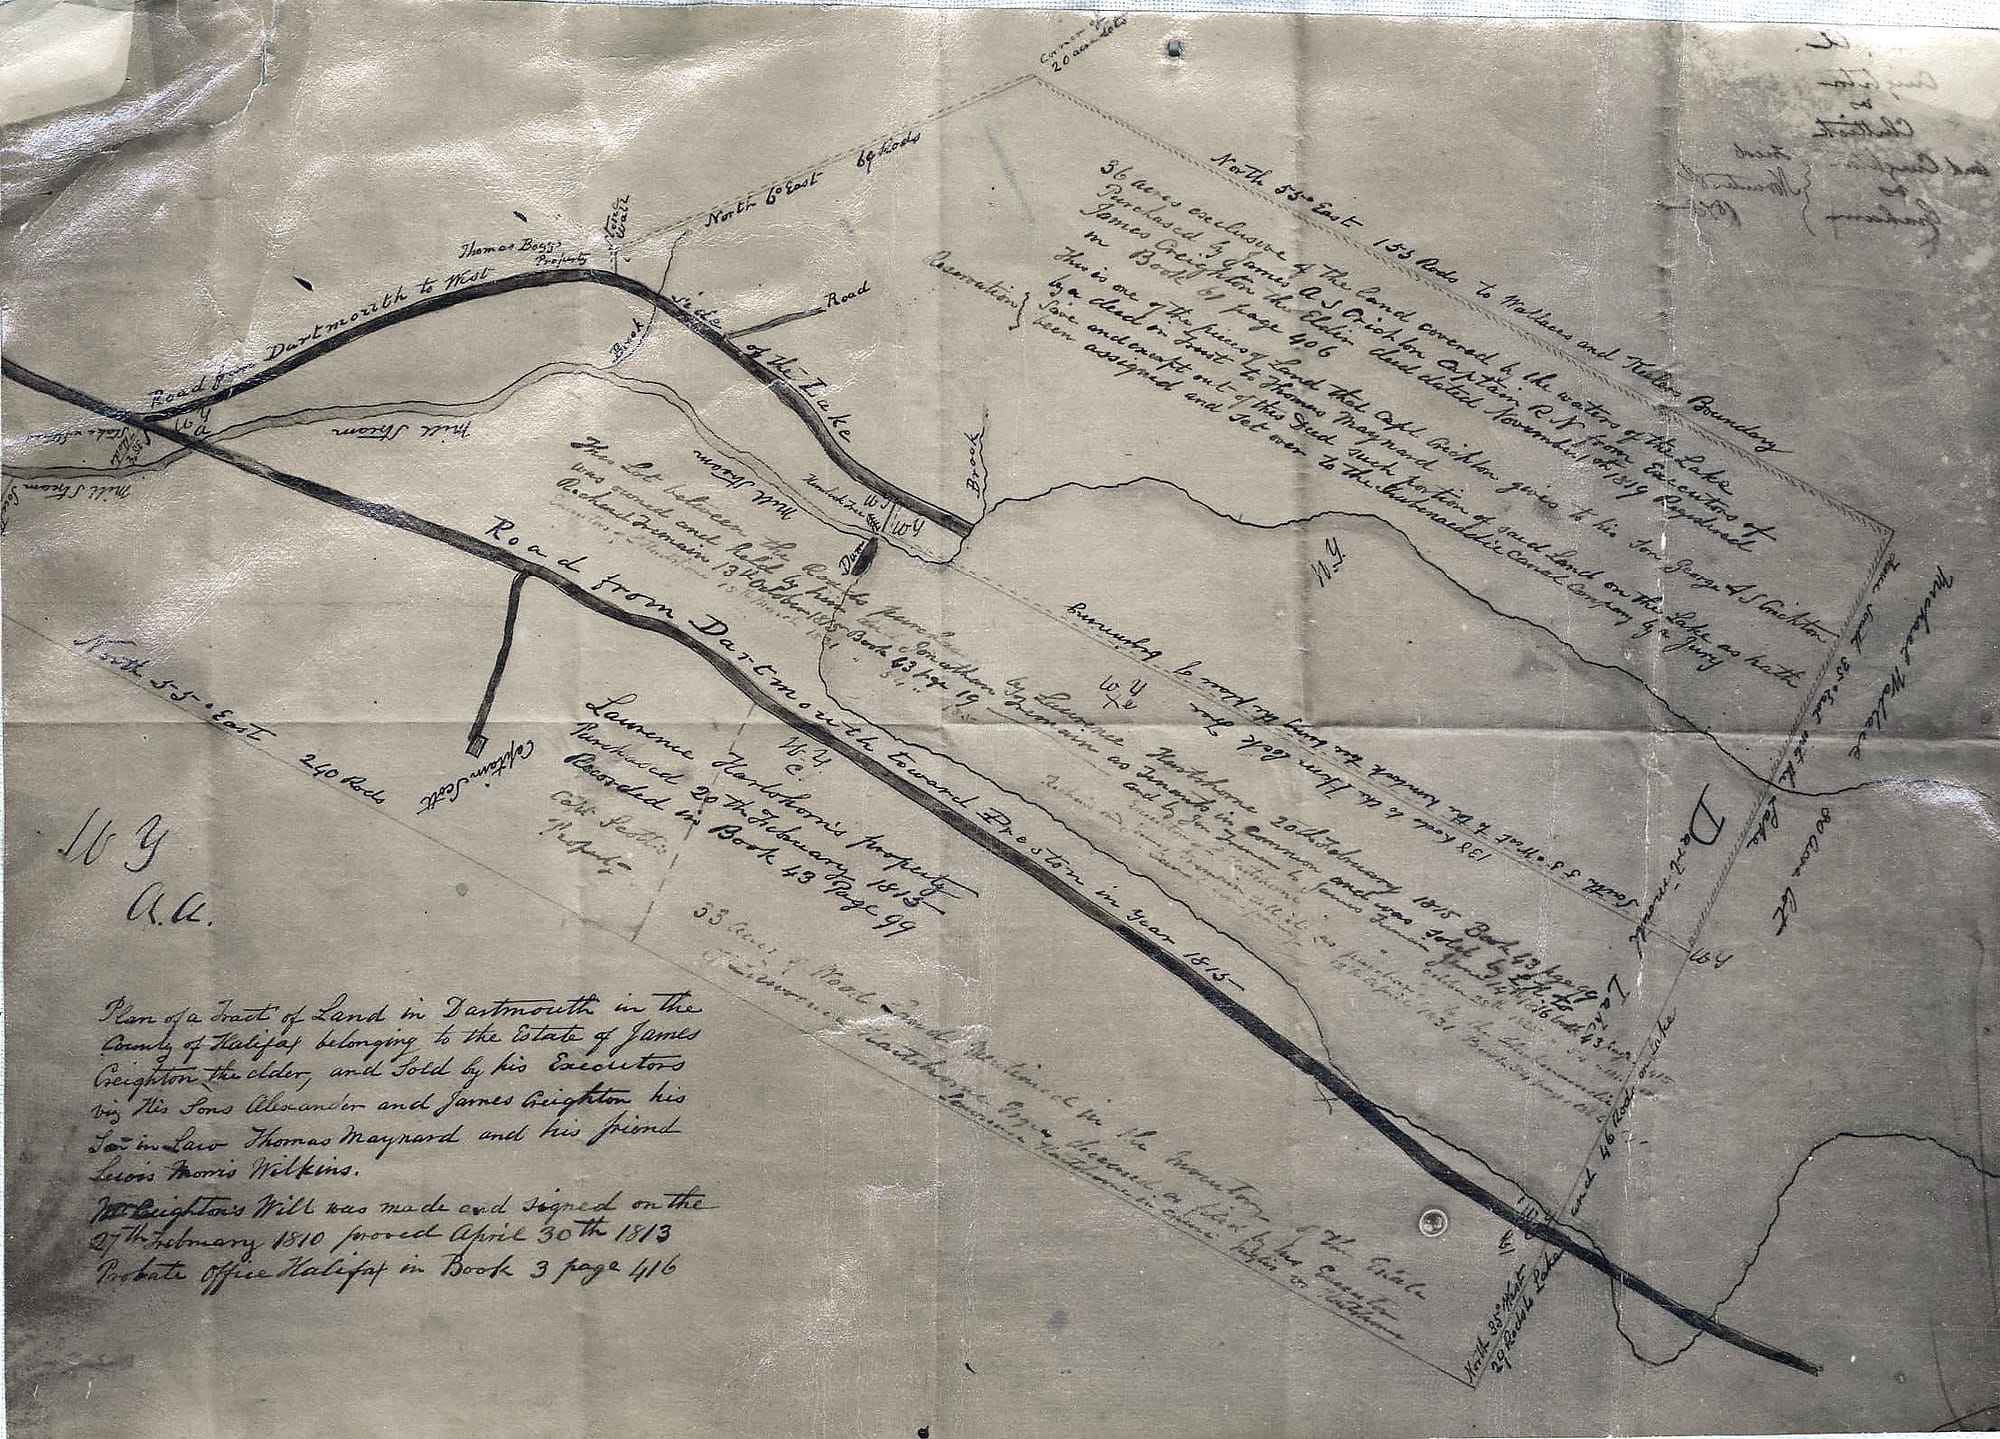 “Tract of land in Dartmouth, belonging to the estate of James Creighton…”